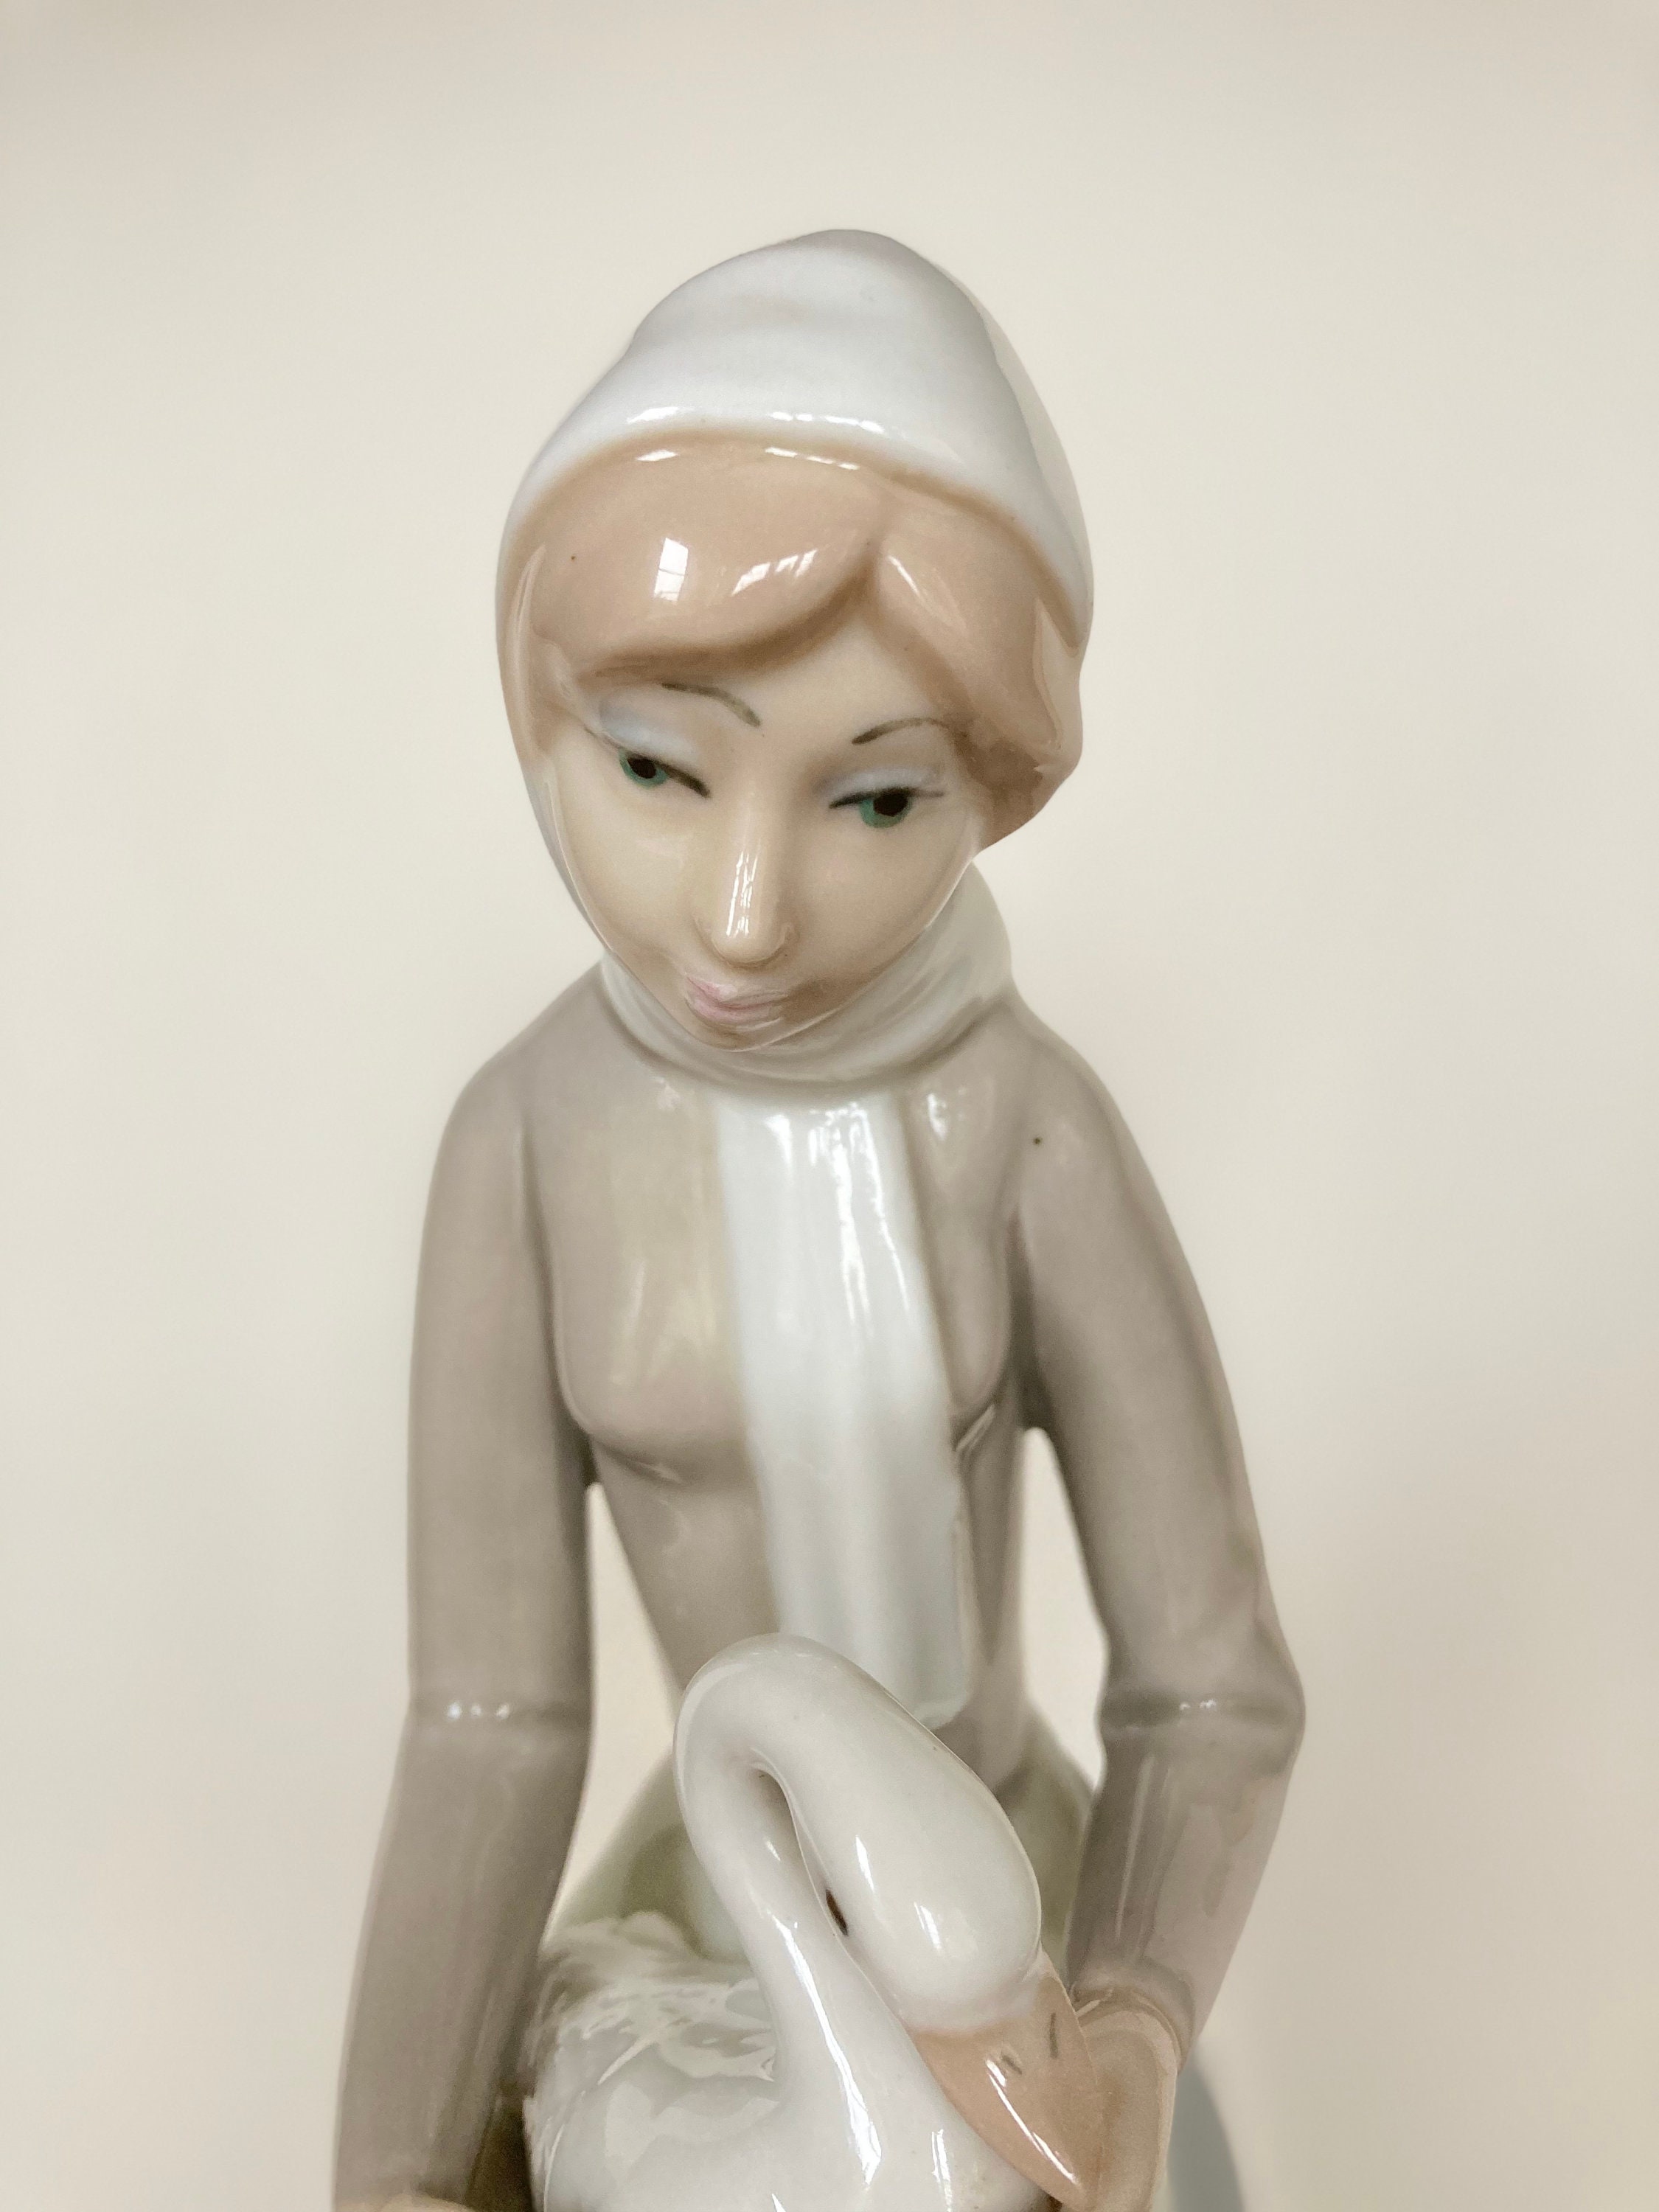 Porcelain. Girls and Swans. 25x22x36cm - Reproduction of ancient Art